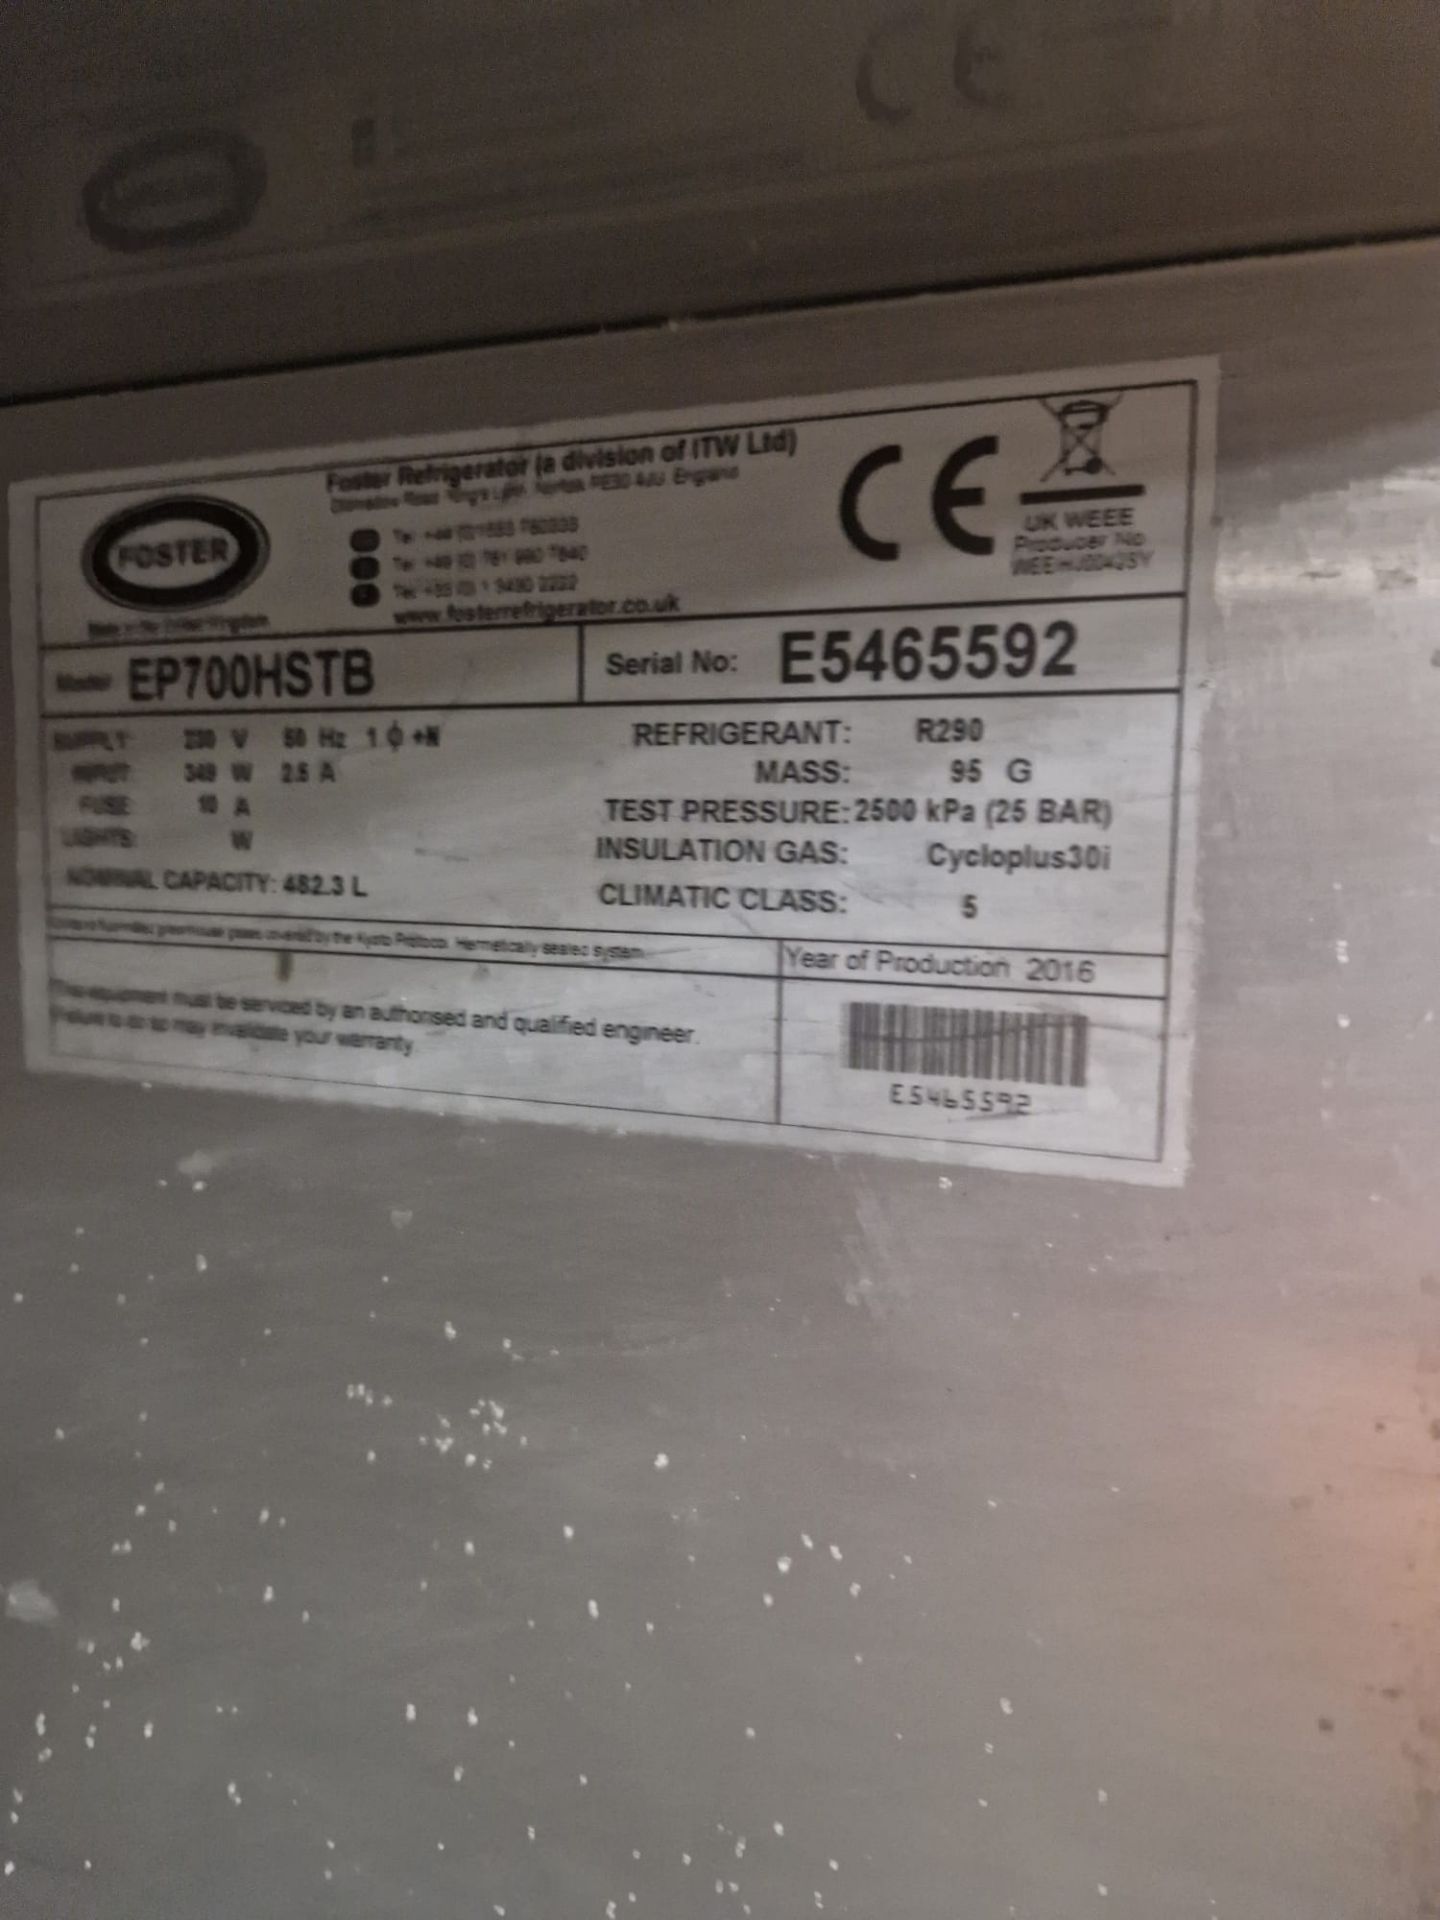 FOSTER SLIM LINE FREEZER - EP700 HSTB -18 TO -22 - FULLY SERVICED AND WORKING - Image 2 of 3